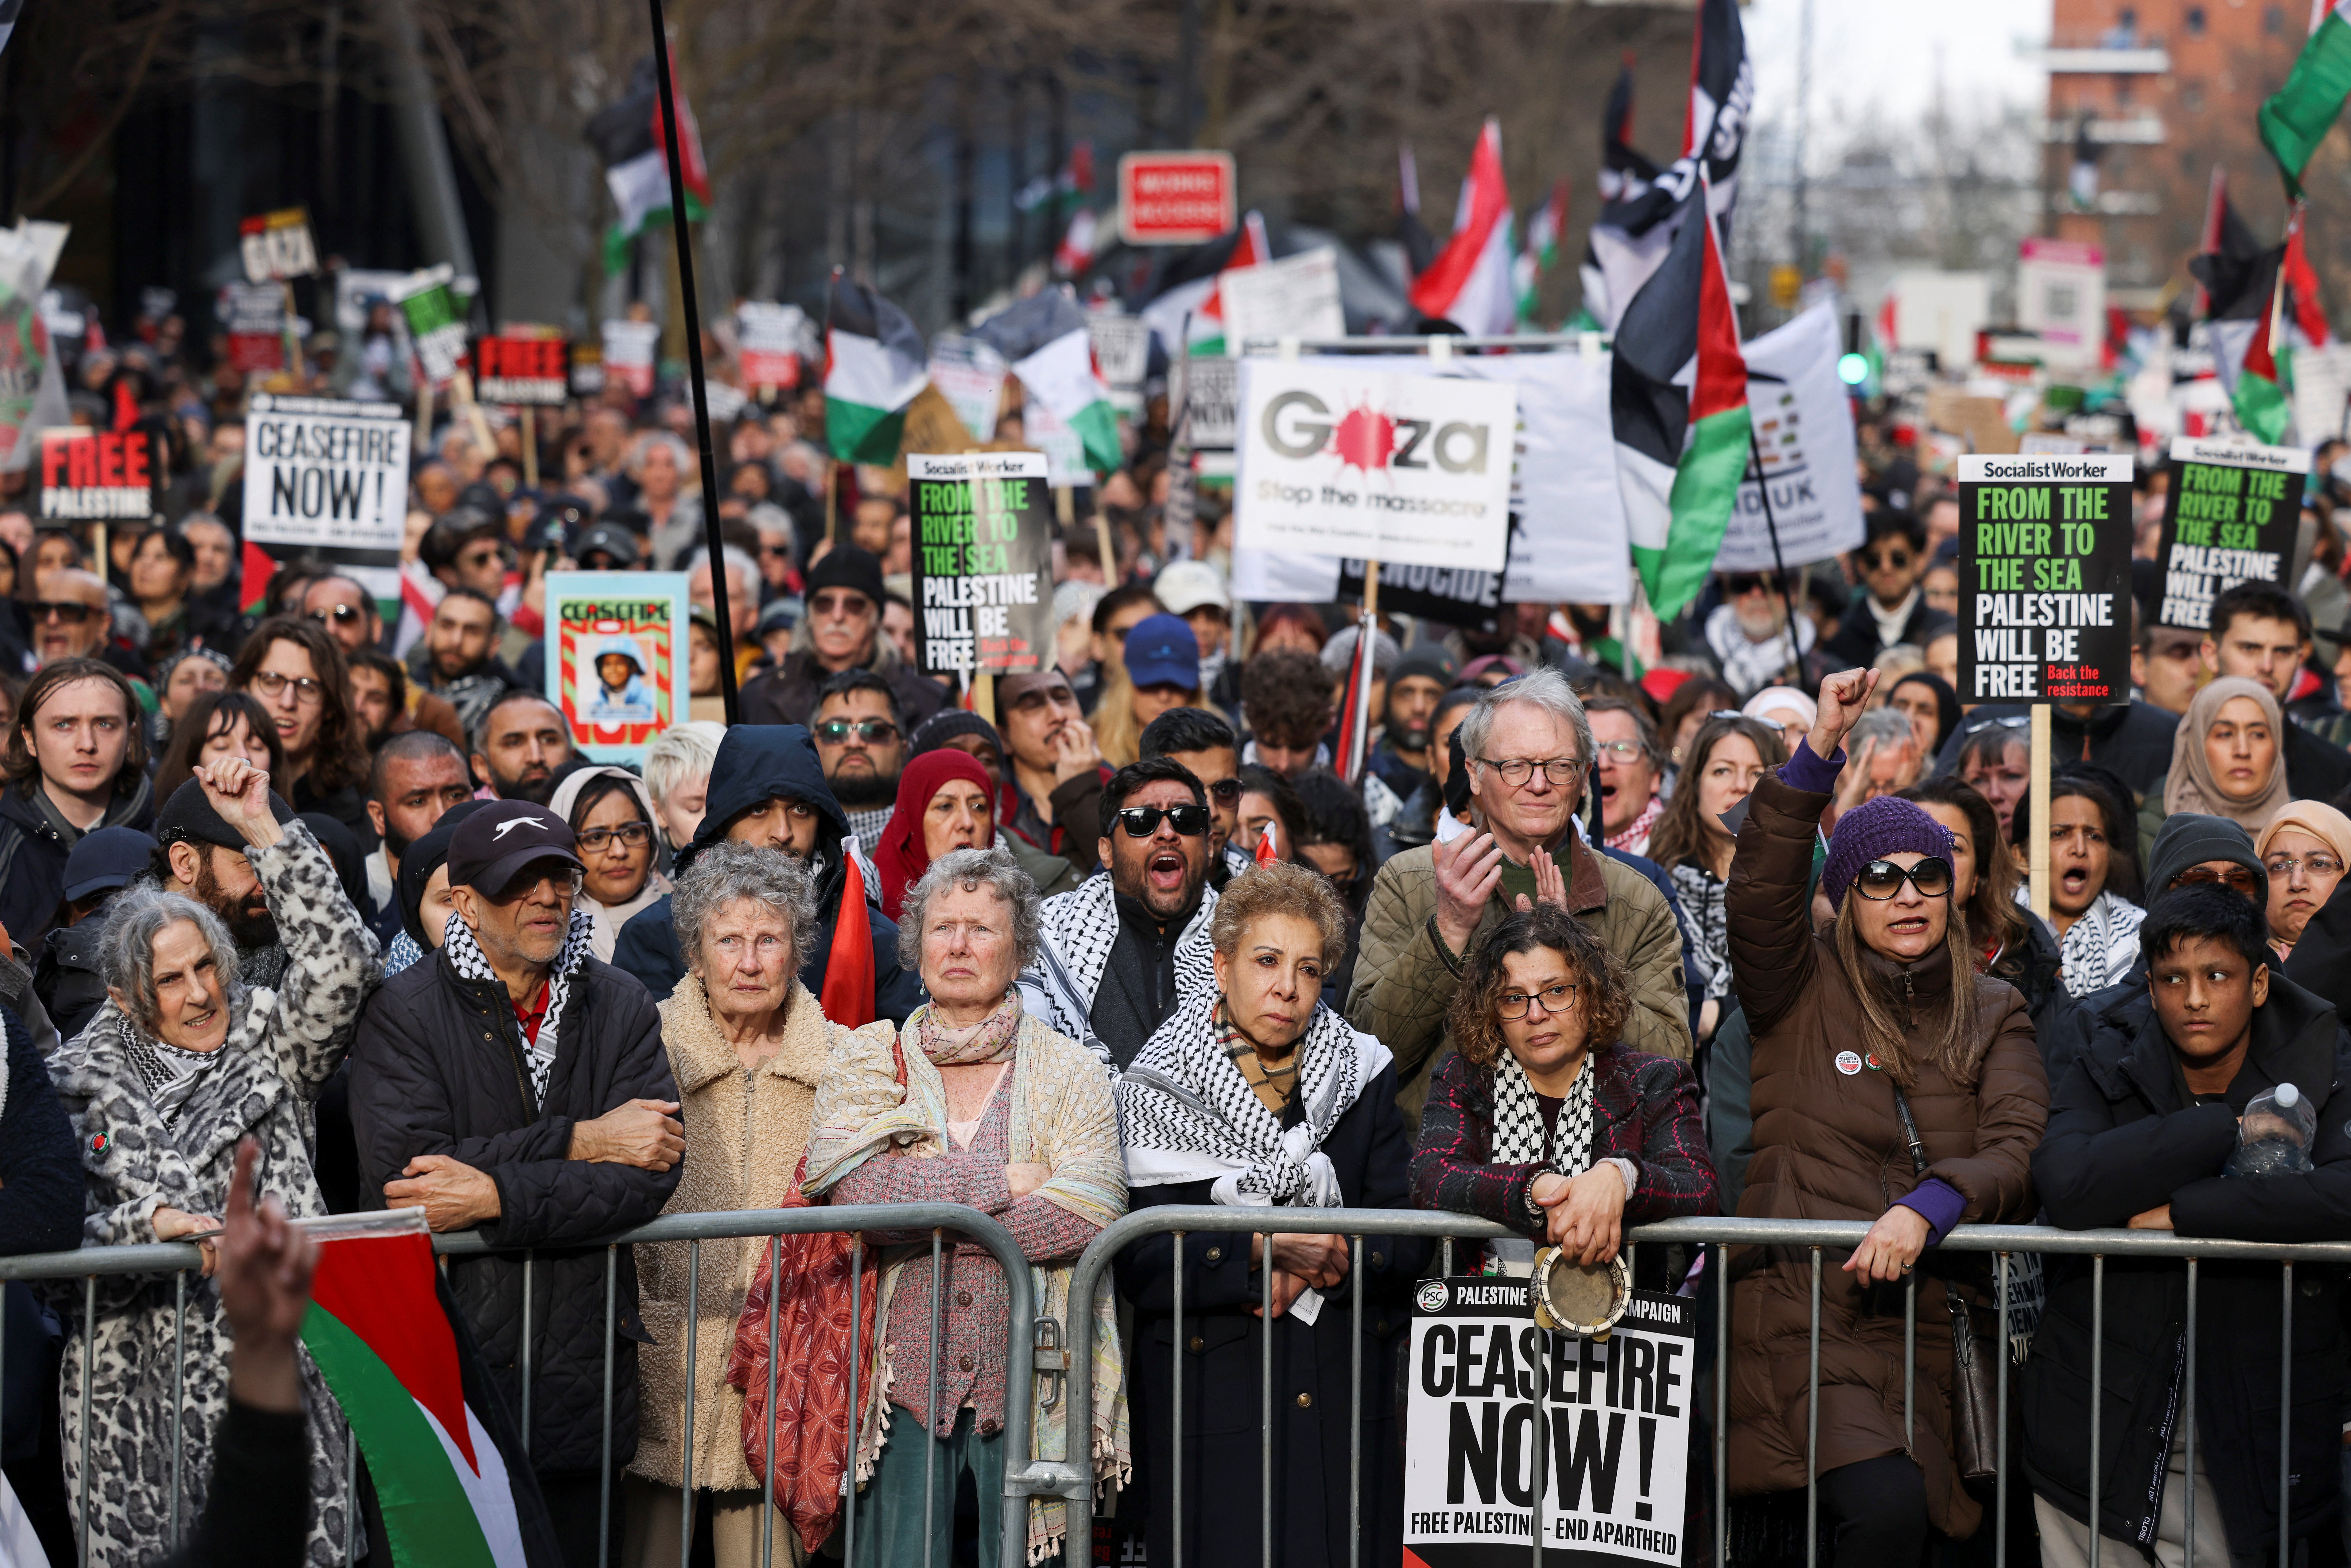 Thousands of demonstrators attend a pro-Palestinian protest